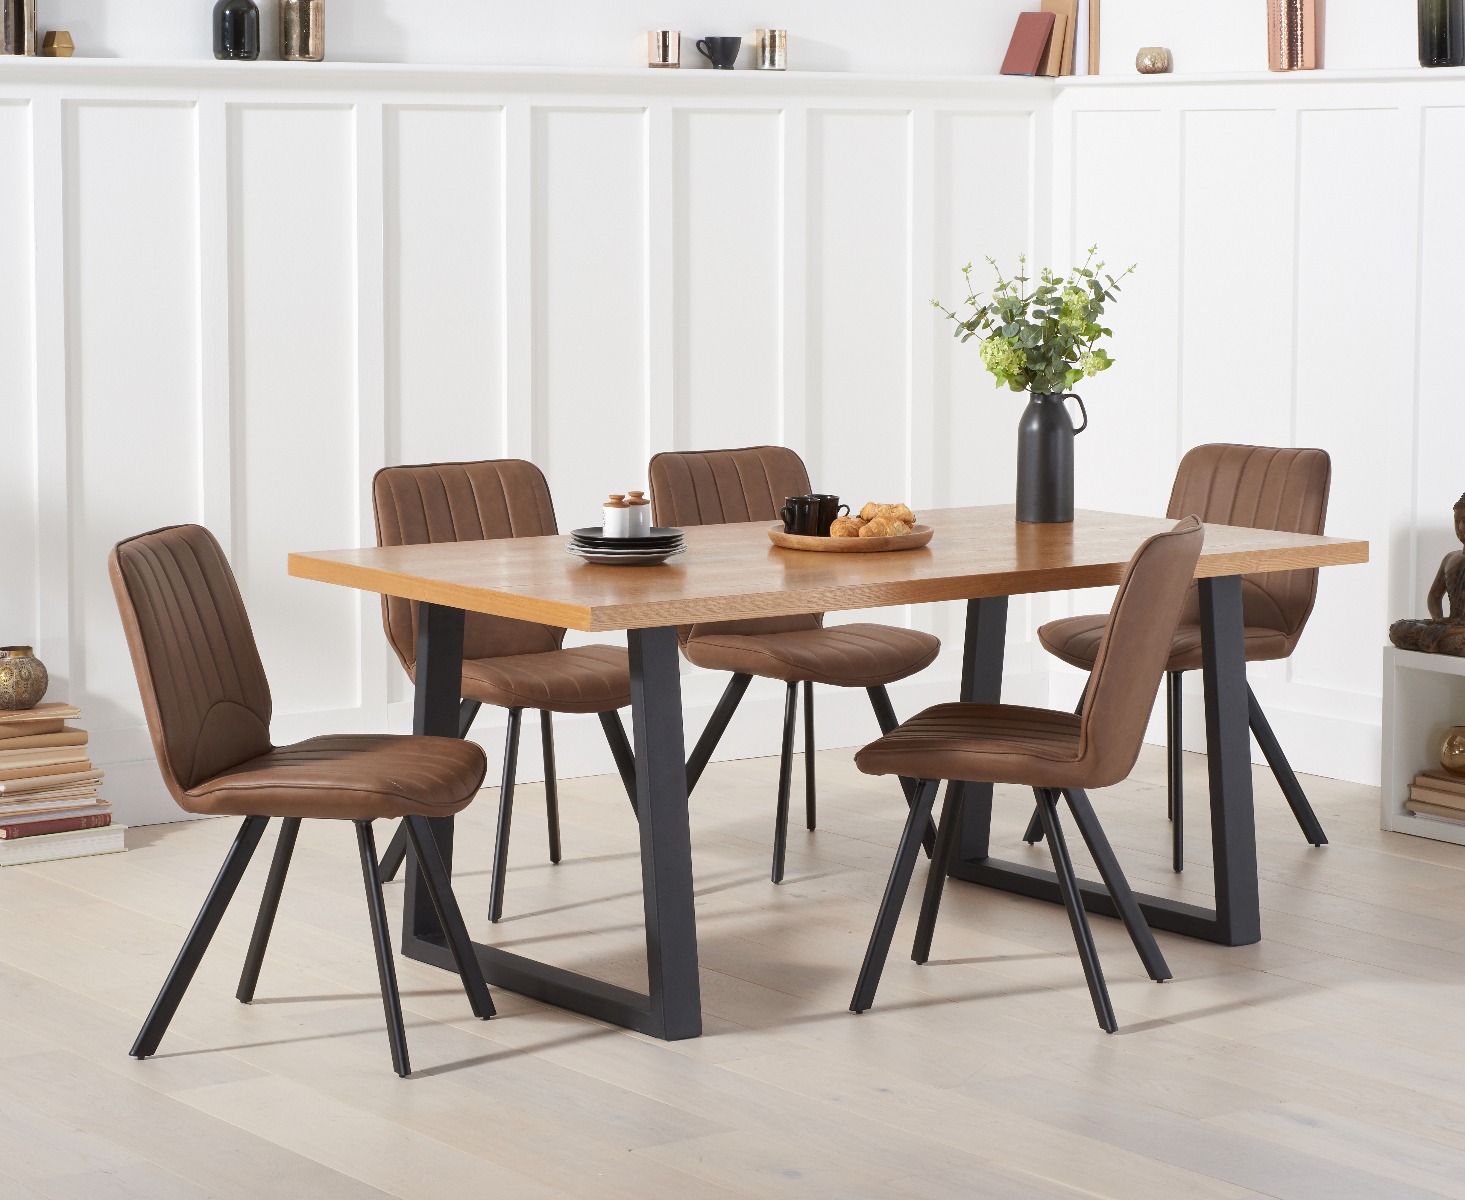 Urban 180cm Ash And Veneer Industrial Dining Table With 8 Grey Hendrick Chairs